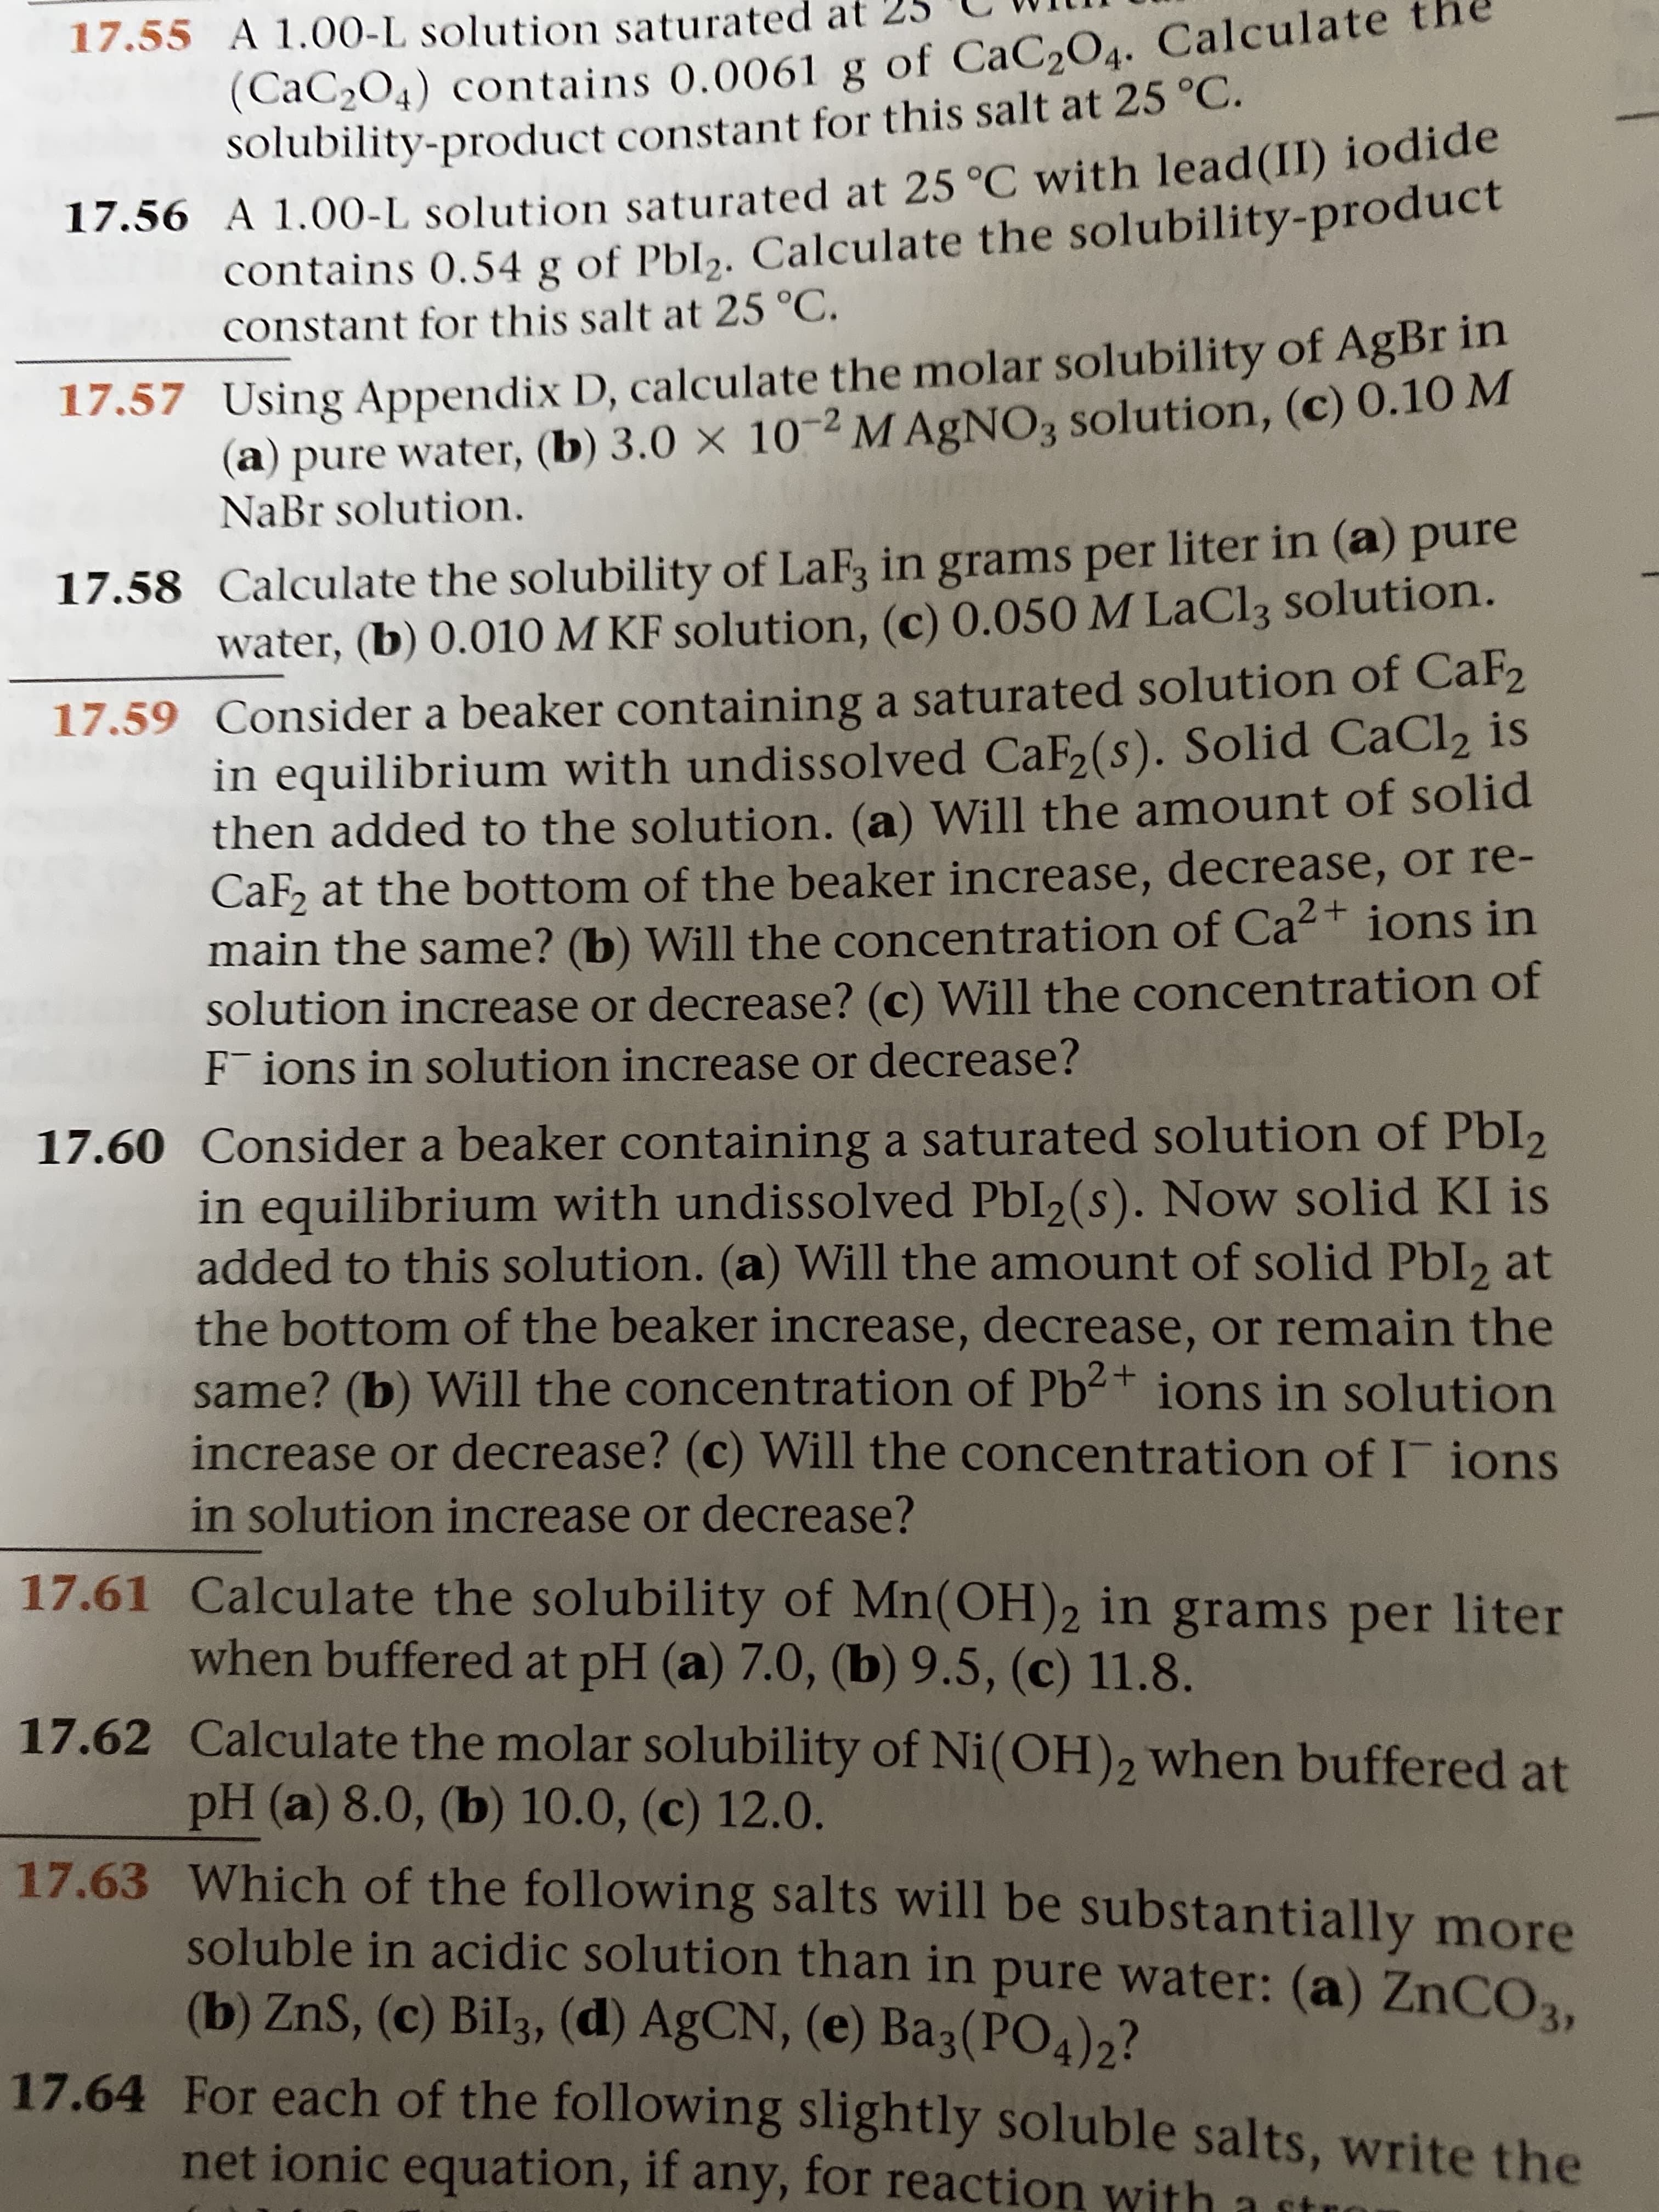 (CaC2O4) contains 0.0061 g of CaC,O4. Calculate
solubility-product constant for this salt at 25 °C.
17.55 A 1.00-L solution saturated at
contains 0,54 g of Pbl,. Calculate the solubility-product
constant for this salt at 25 °C.
17.56 A 1.00-L solution saturated at 25 °C with lead(II) iodide
(a) pure water, (b) 3.0 × 10-2 M AgNO3 solution, (c) 0.10 M
NaBr solution.
17.57 Using Appendix D, calculate the molar solubility of AgBr in
17.58 Calculate the solubility of LaF, in grams per liter in (a) pure
water, (b) 0.010 M KF solution, (c) 0.050 M LaCl3 solution.
17.59 Consider a beaker containing a saturated solution of CaF2
in equilibrium with undissolved CaF(s). Solid CaCl2 is
then added to the solution. (a) Will the amount of solid
CaF, at the bottom of the beaker increase, decrease, or re-
main the same? (b) Will the concentration of Ca² + ions in
solution increase or decrease? (c) Will the concentration of
F ions in solution increase or decrease?
17.60 Consider a beaker containing a saturated solution of PbI2
in equilibrium with undissolved PbI2(s). Now solid KI is
added to this solution. (a) Will the amount of solid Pbl2 at
the bottom of the beaker increase, decrease, or remain the
same? (b) Will the concentration of Pb2+ ions in solution
increase or decrease? (c) Will the concentration of I ions
in solution increase or decrease?
17.61 Calculate the solubility of Mn(OH)2 in grams per liter
when buffered at pH (a) 7.0, (b) 9.5, (c) 11.8.
17.62 Calculate the molar solubility of Ni(OH)2 when buffered at
pH (a) 8.0, (b) 10.0, (c) 12.0.
17.63 Which of the following salts will be substantially more
soluble in acidic solution than in pure water: (a) ZNCO,
(b) ZnS, (c) Bil3, (d) AGCN, (e) Ba3(PO4)2?
17.64 For each of the following slightly soluble salts, write the
net ionic equation, if any, for reaction with a st
